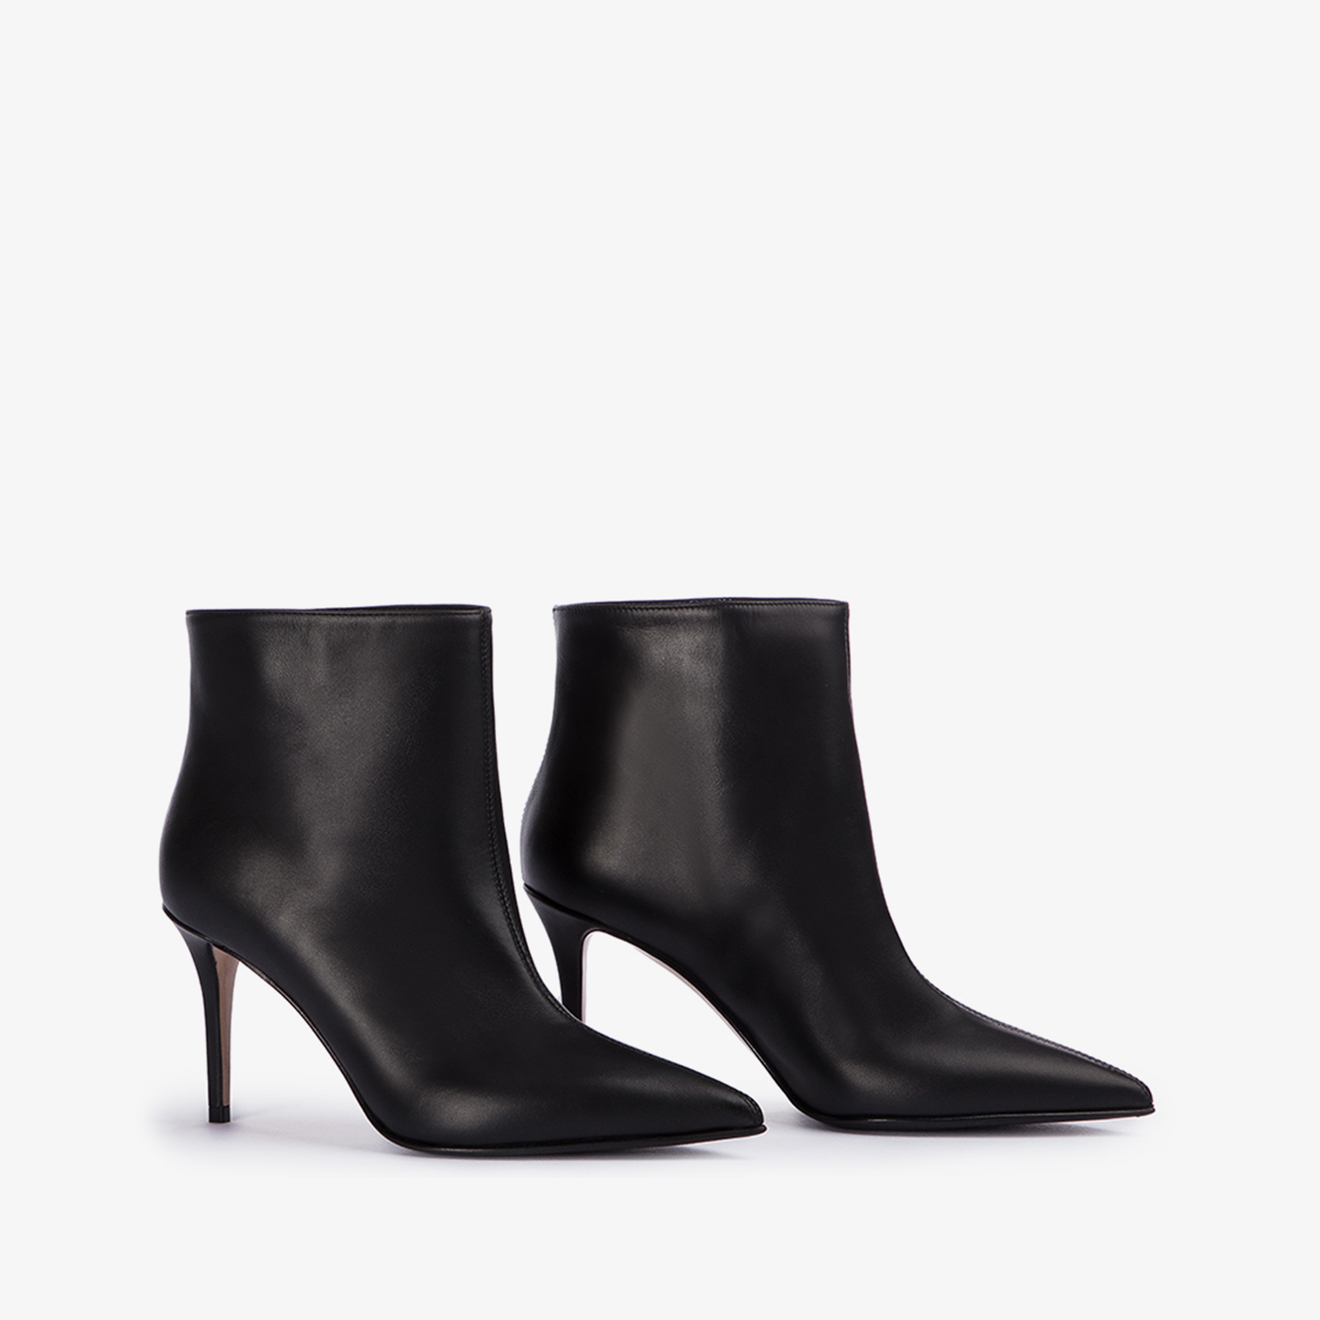 EVA ANKLE BOOT 90 mm - Le Silla official outlet